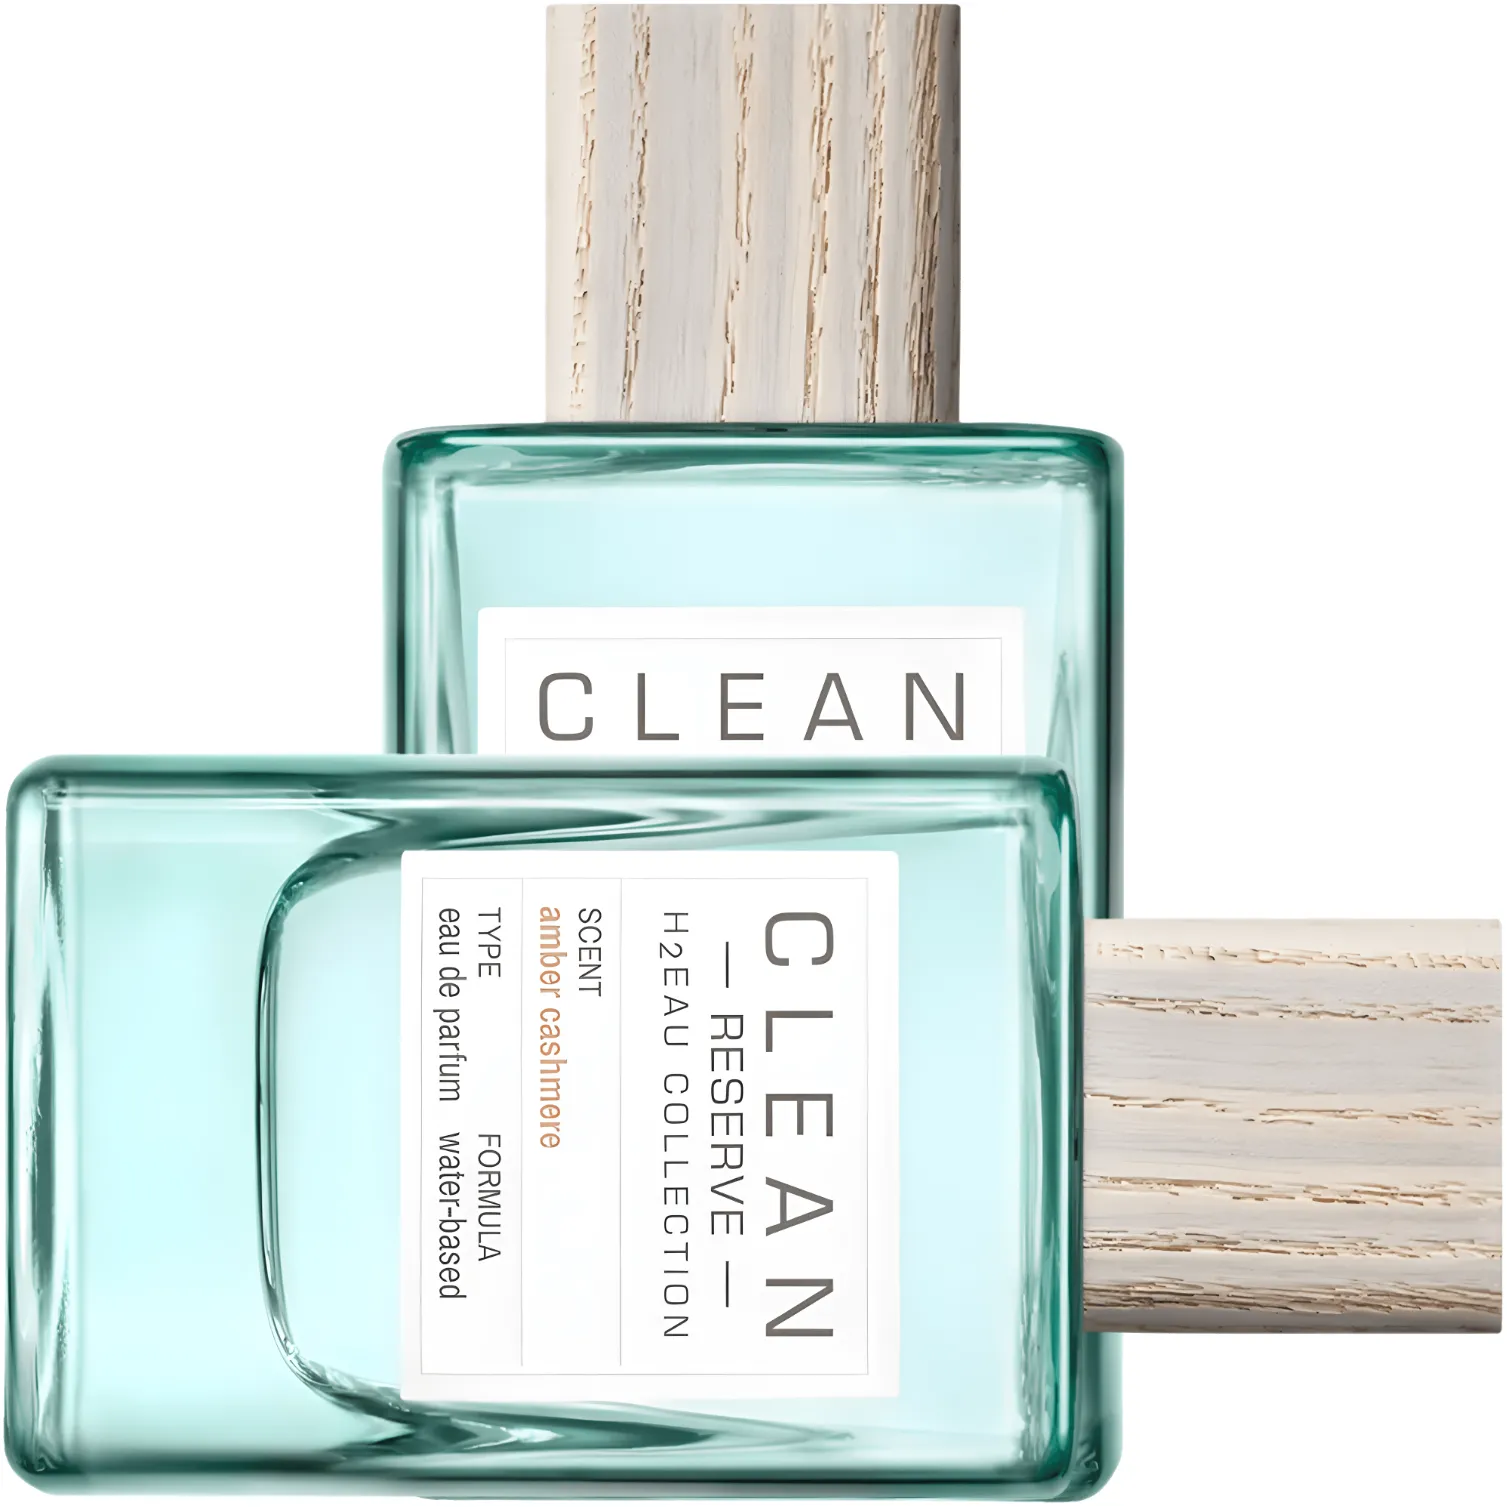 Free Clean Reserve H2EAU Fragrances For Product Testers